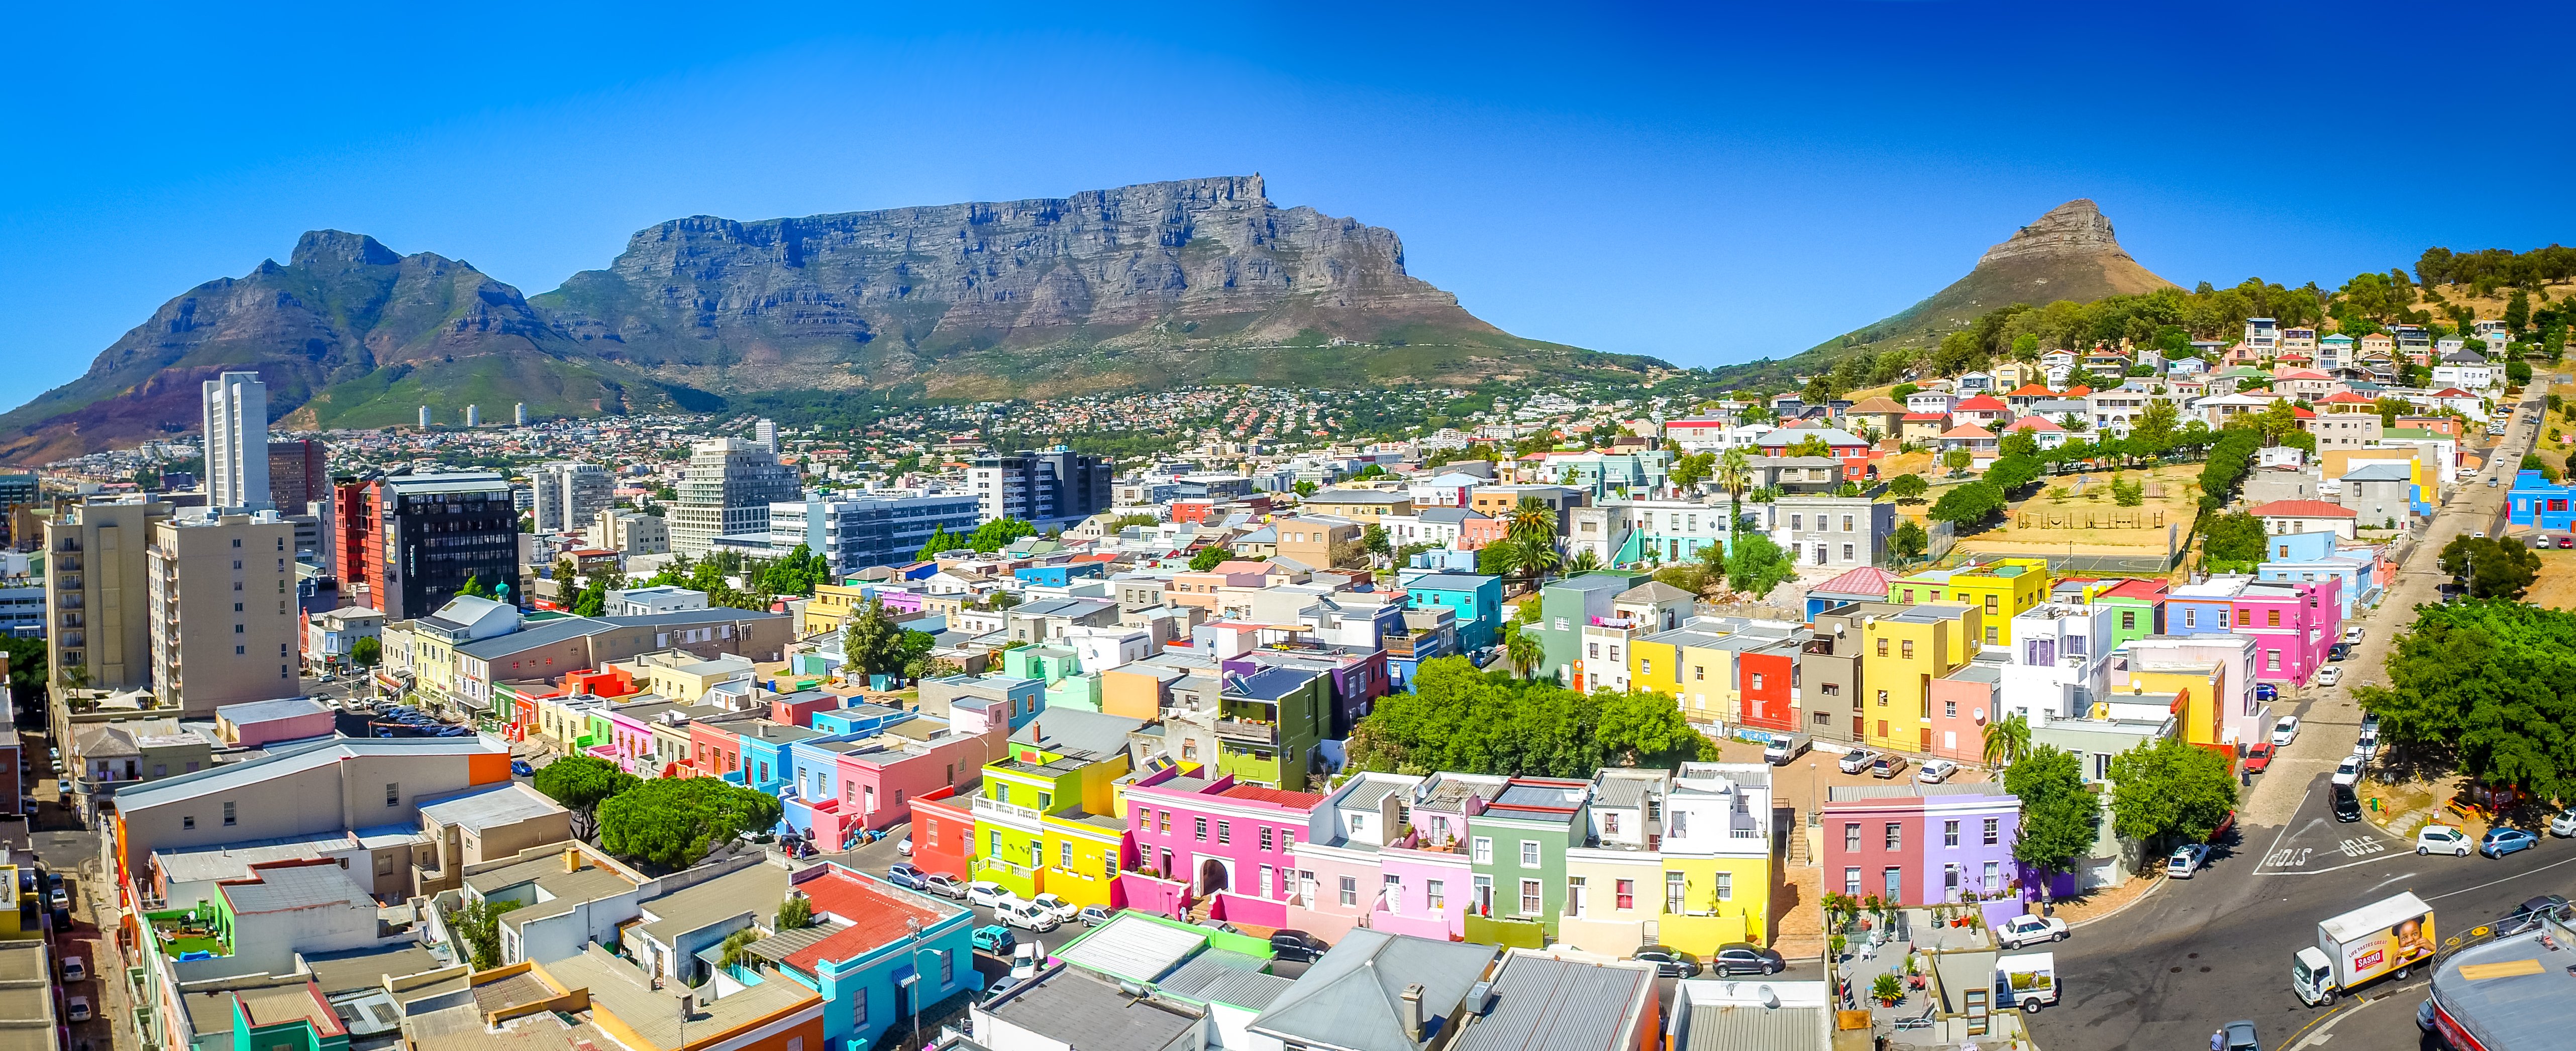 Wallpaper x px bo building cape town city kaap mountains south africa table mountain x